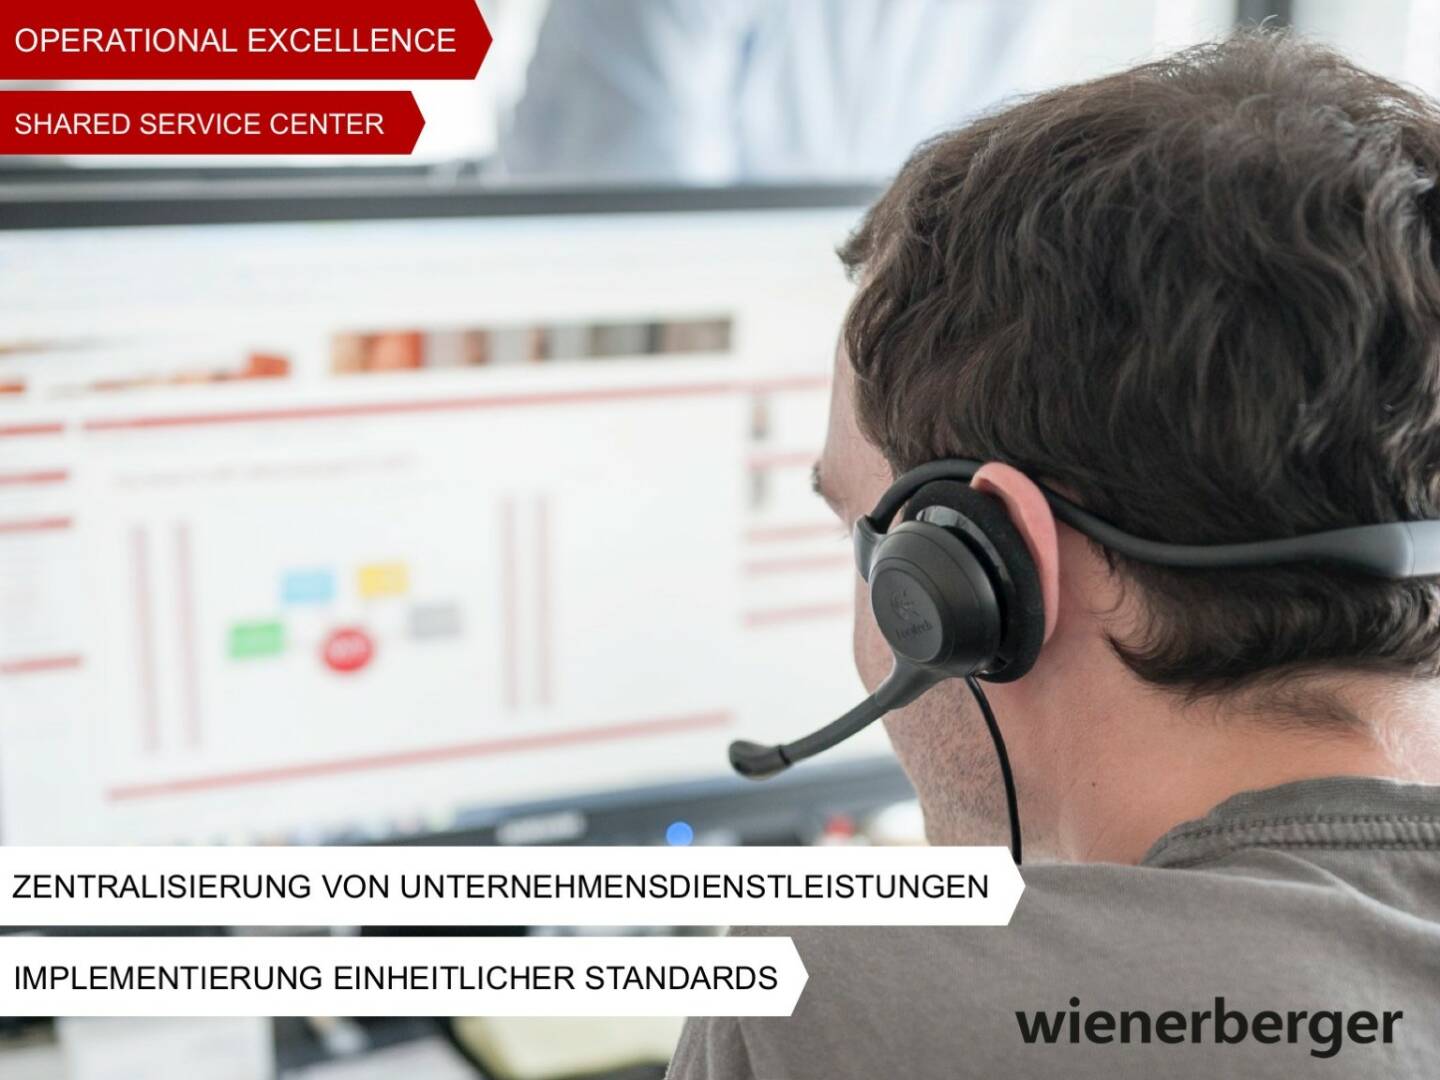 Wienerberger - Operational Excellence